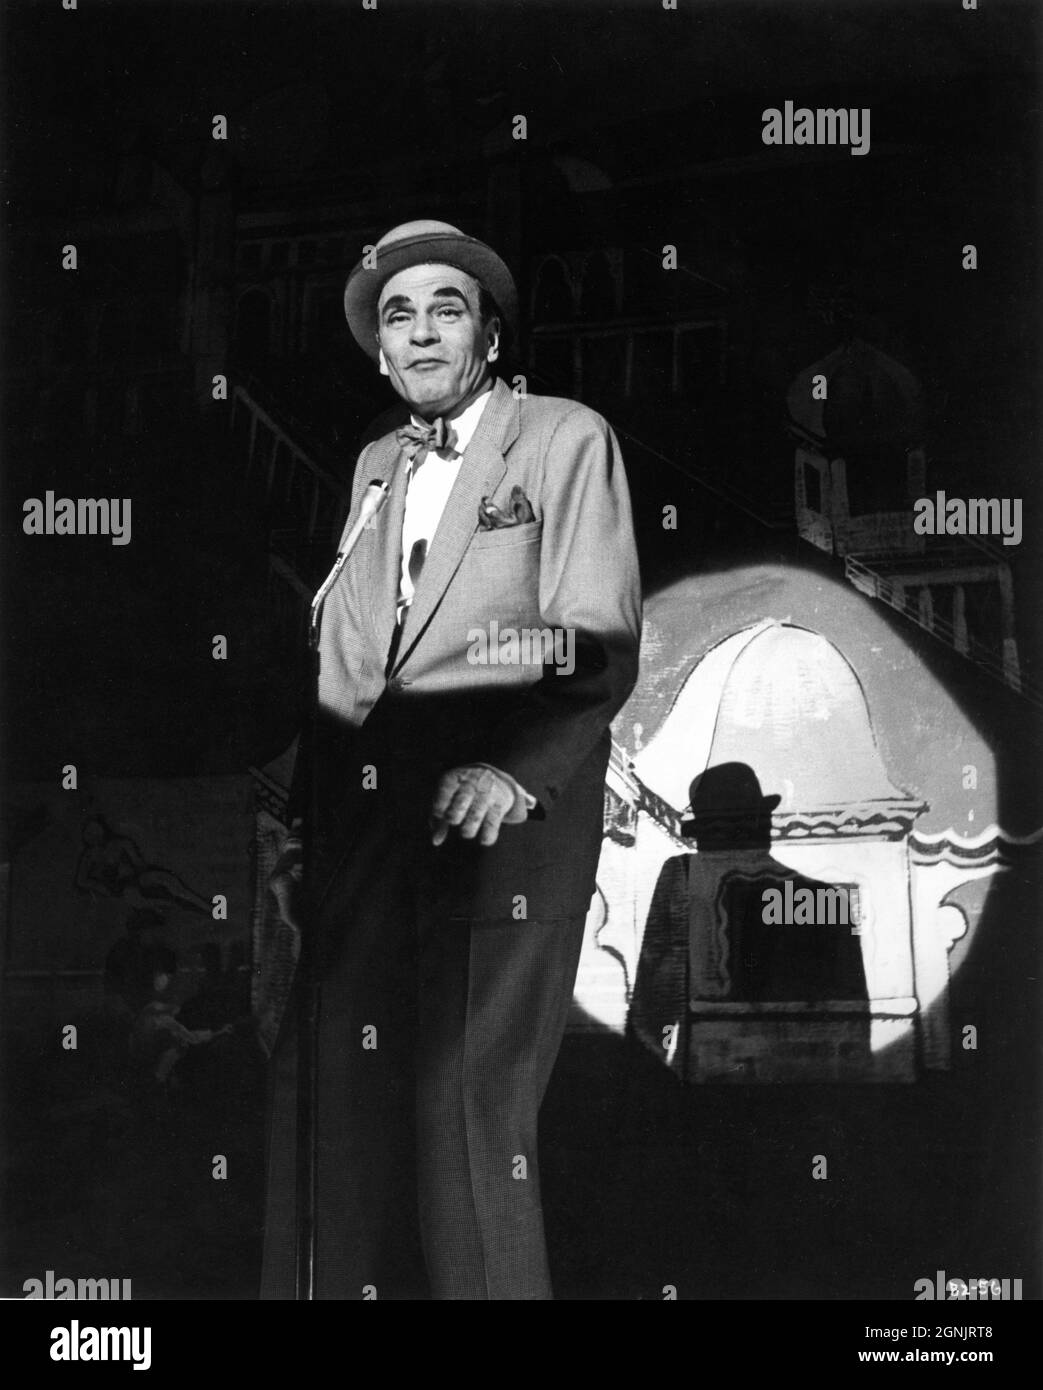 LAURENCE OLIVIER as Archie Rice performing on stage in THE ENTERTAINER 1960 director TONY RICHARDSON screenplay John Osborne and Nigel Kneale adapted from the play by John Osborne music John Addison producer Harry Saltzman Woodfall Film Productions / British Lion Films (UK) - Continental Distributing (US) Stock Photo